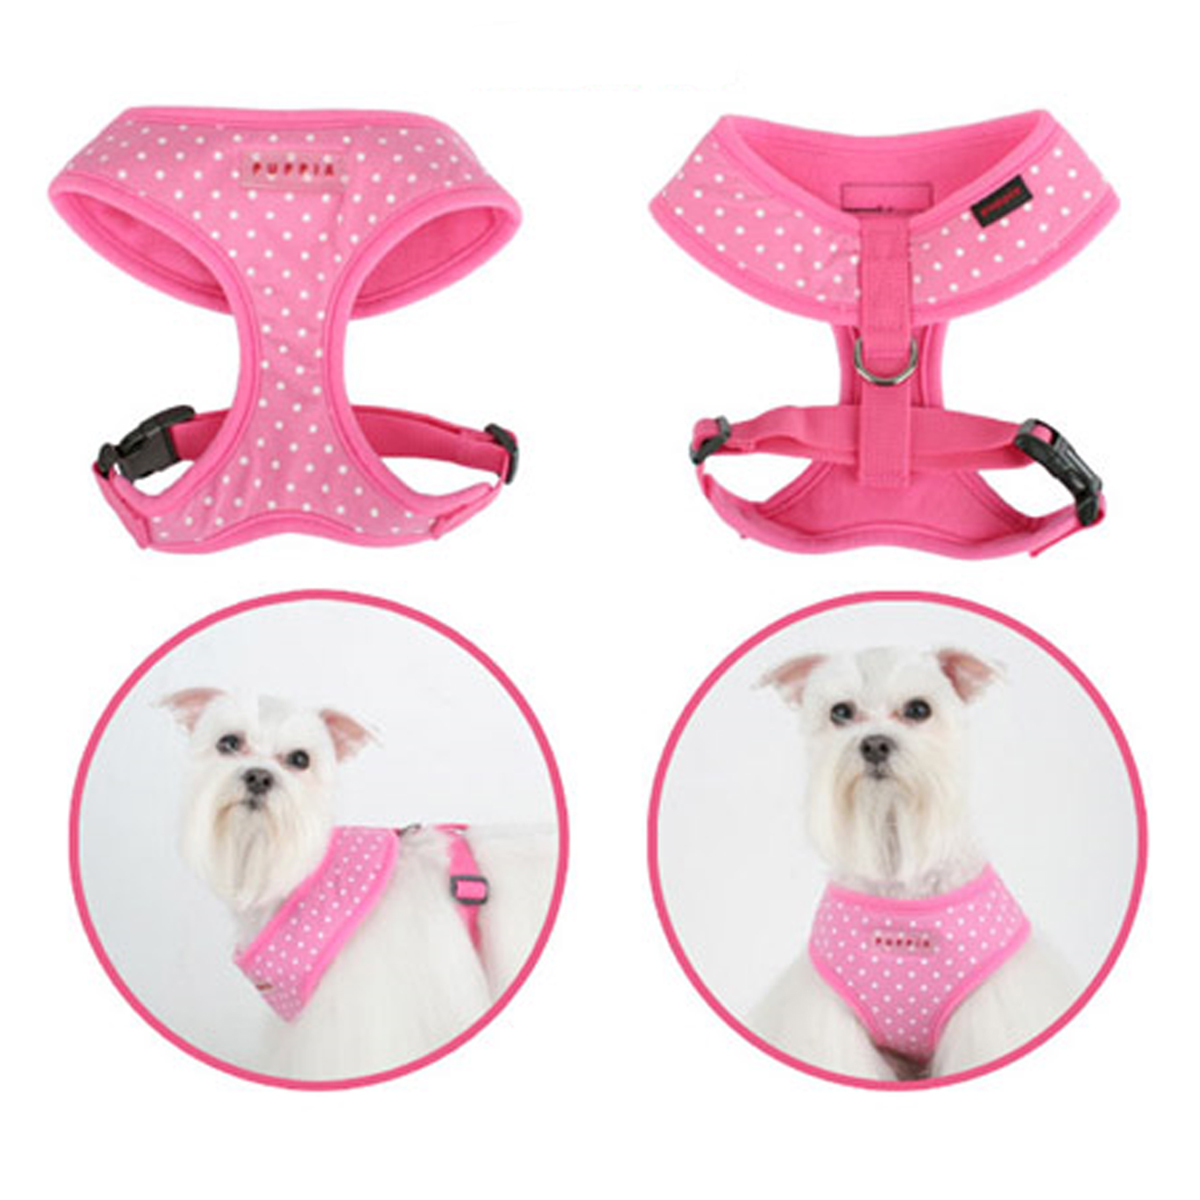 Dotty Adjustable Dog Harness by Puppia - Pink